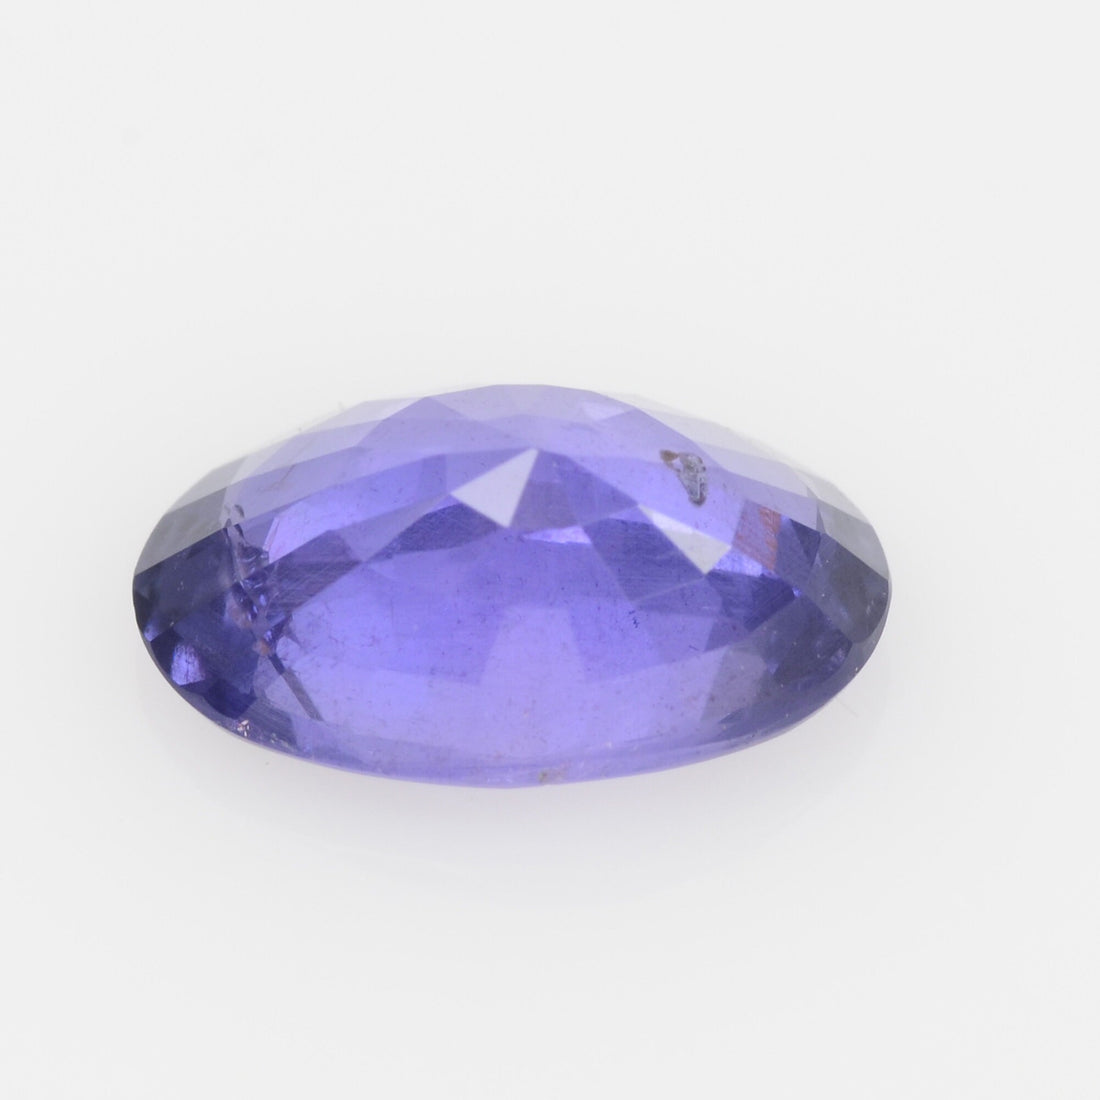 1.50 Cts Unheated Natural Violet Sapphire Loose Gemstone Oval Cut